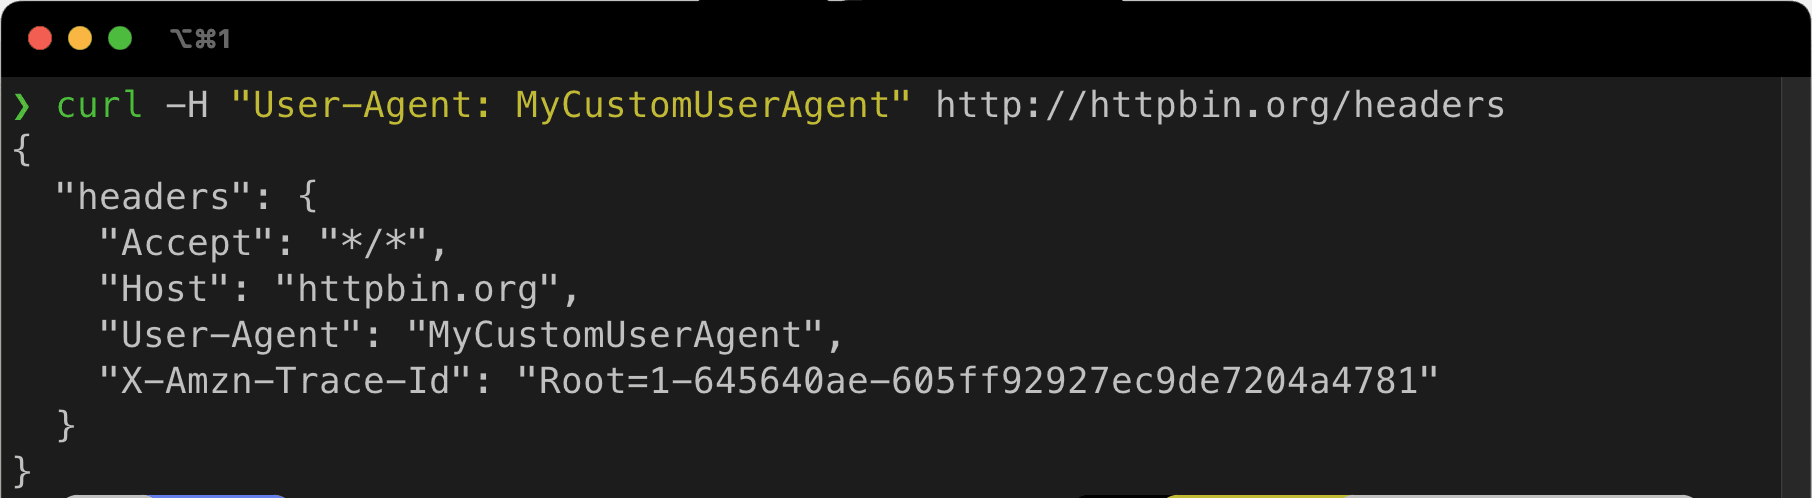 Changing the value of User-Agent